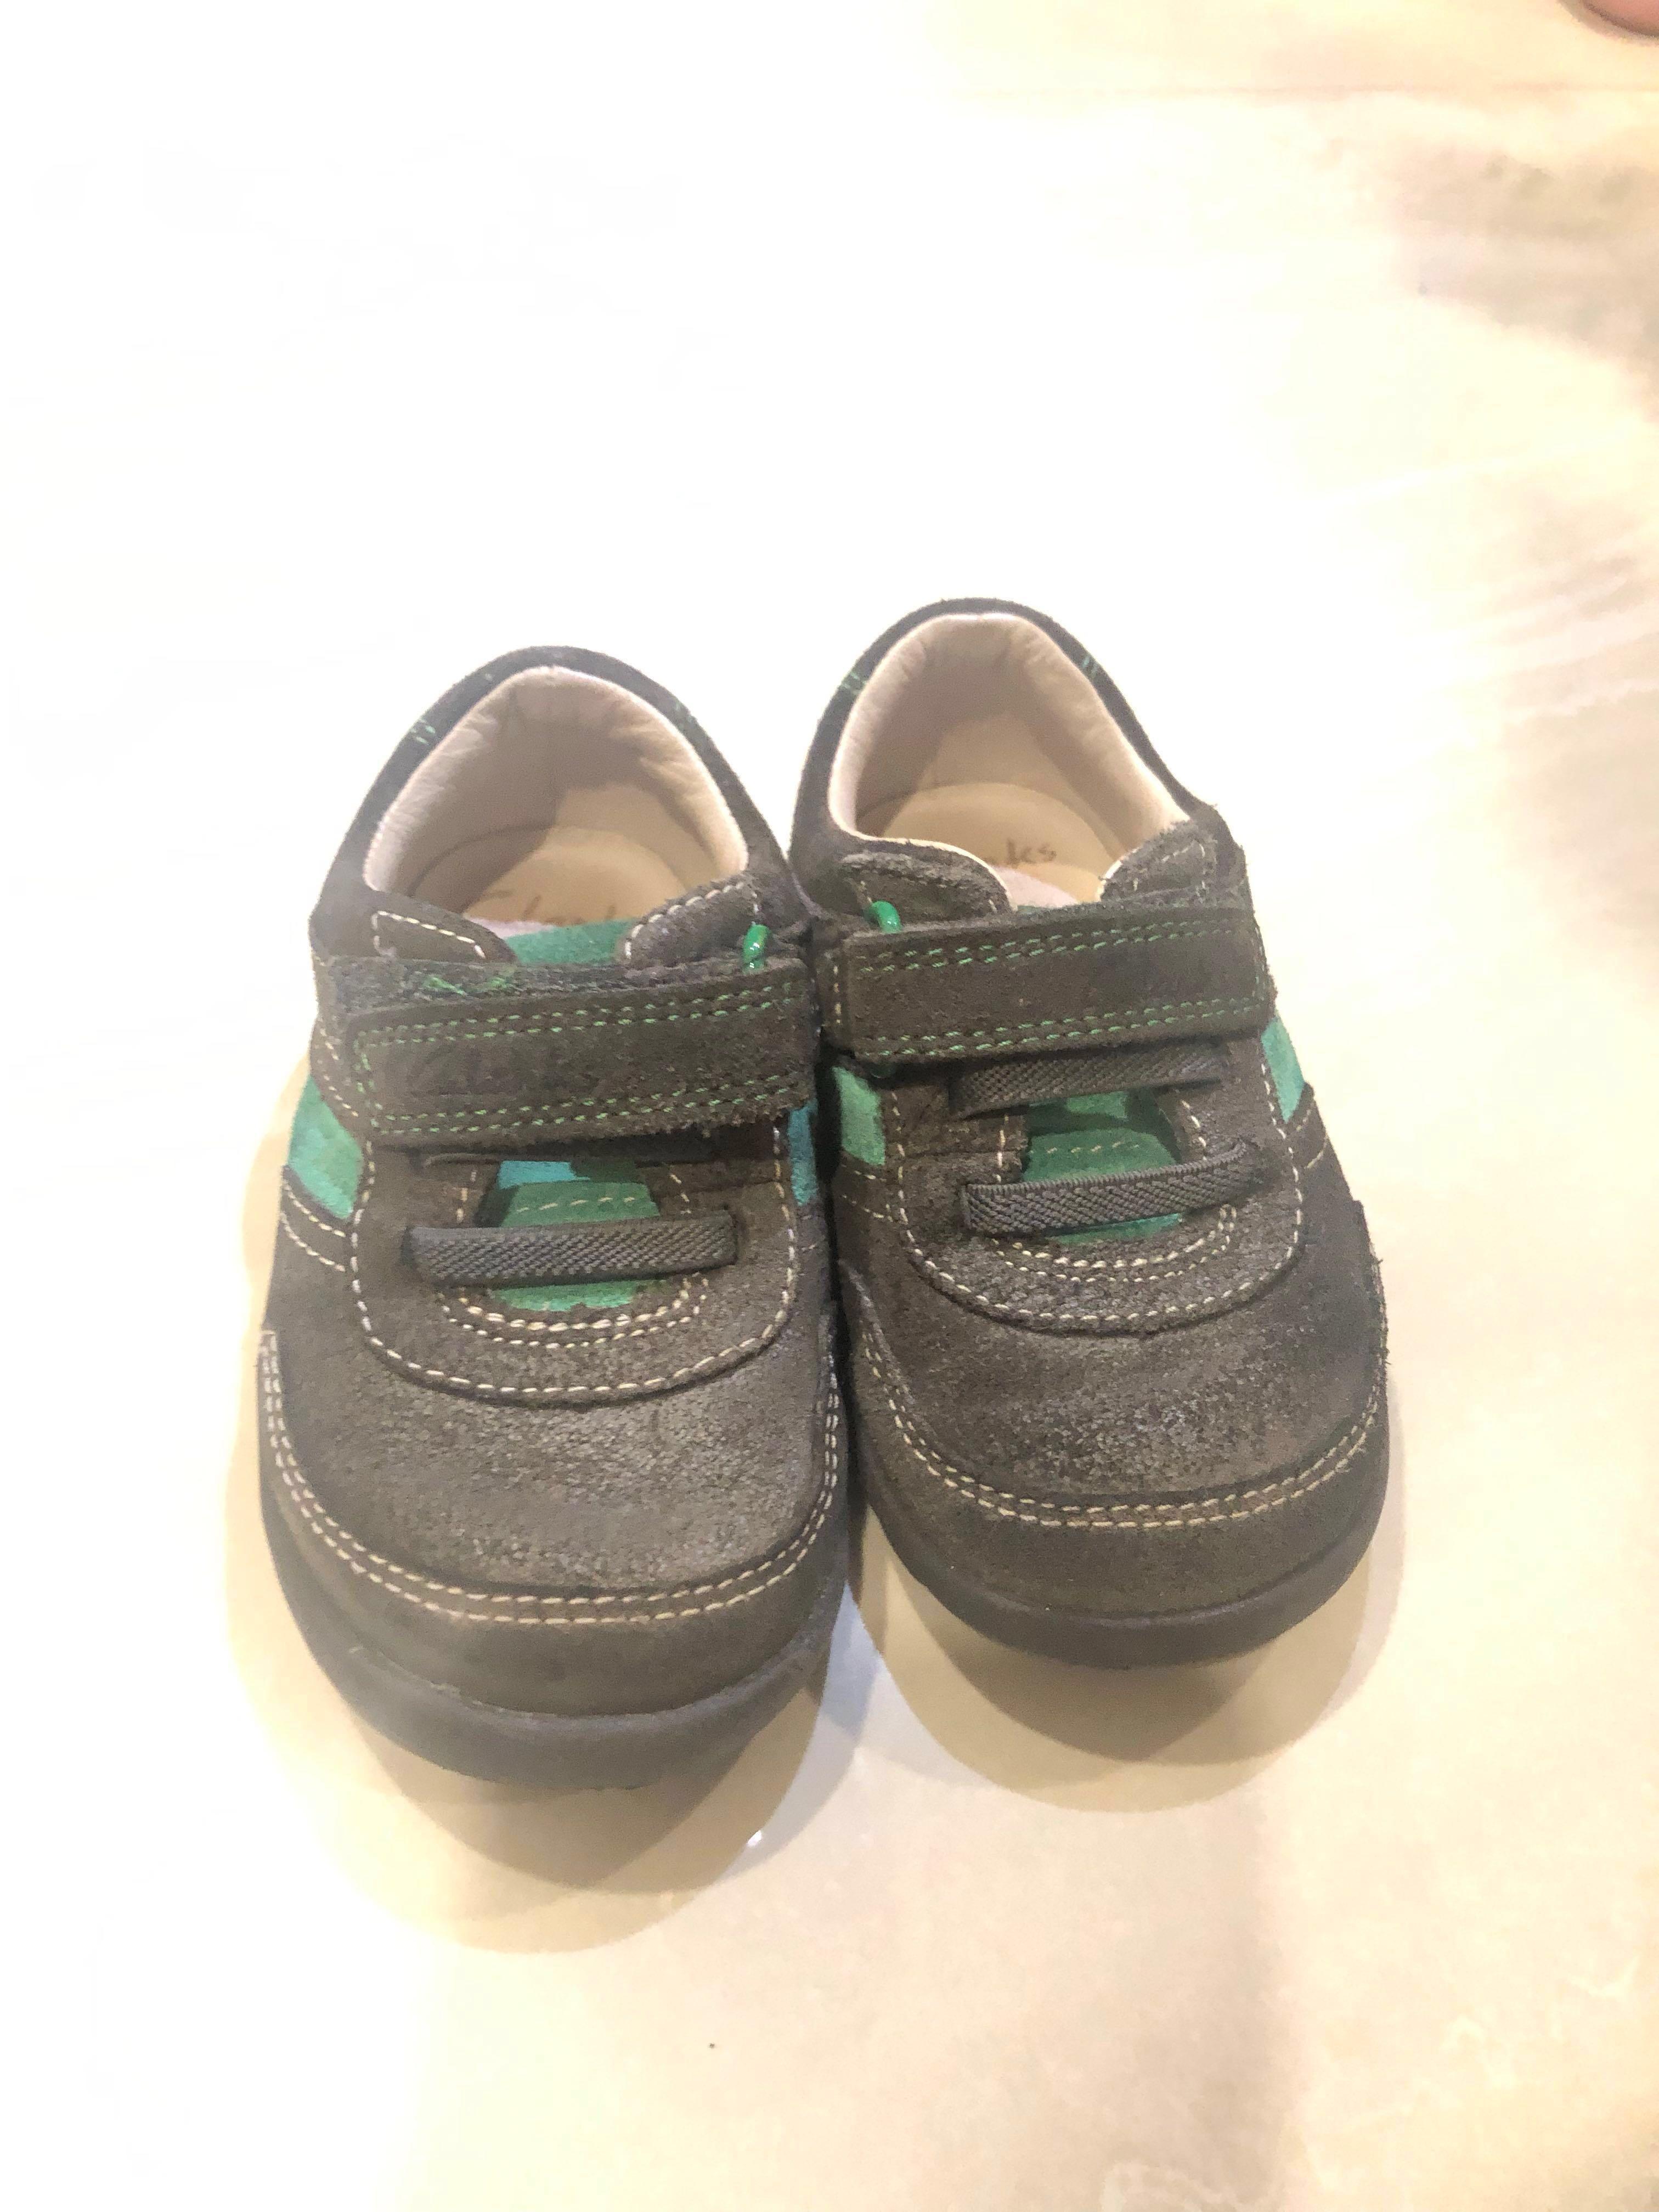 clarks children's first shoes